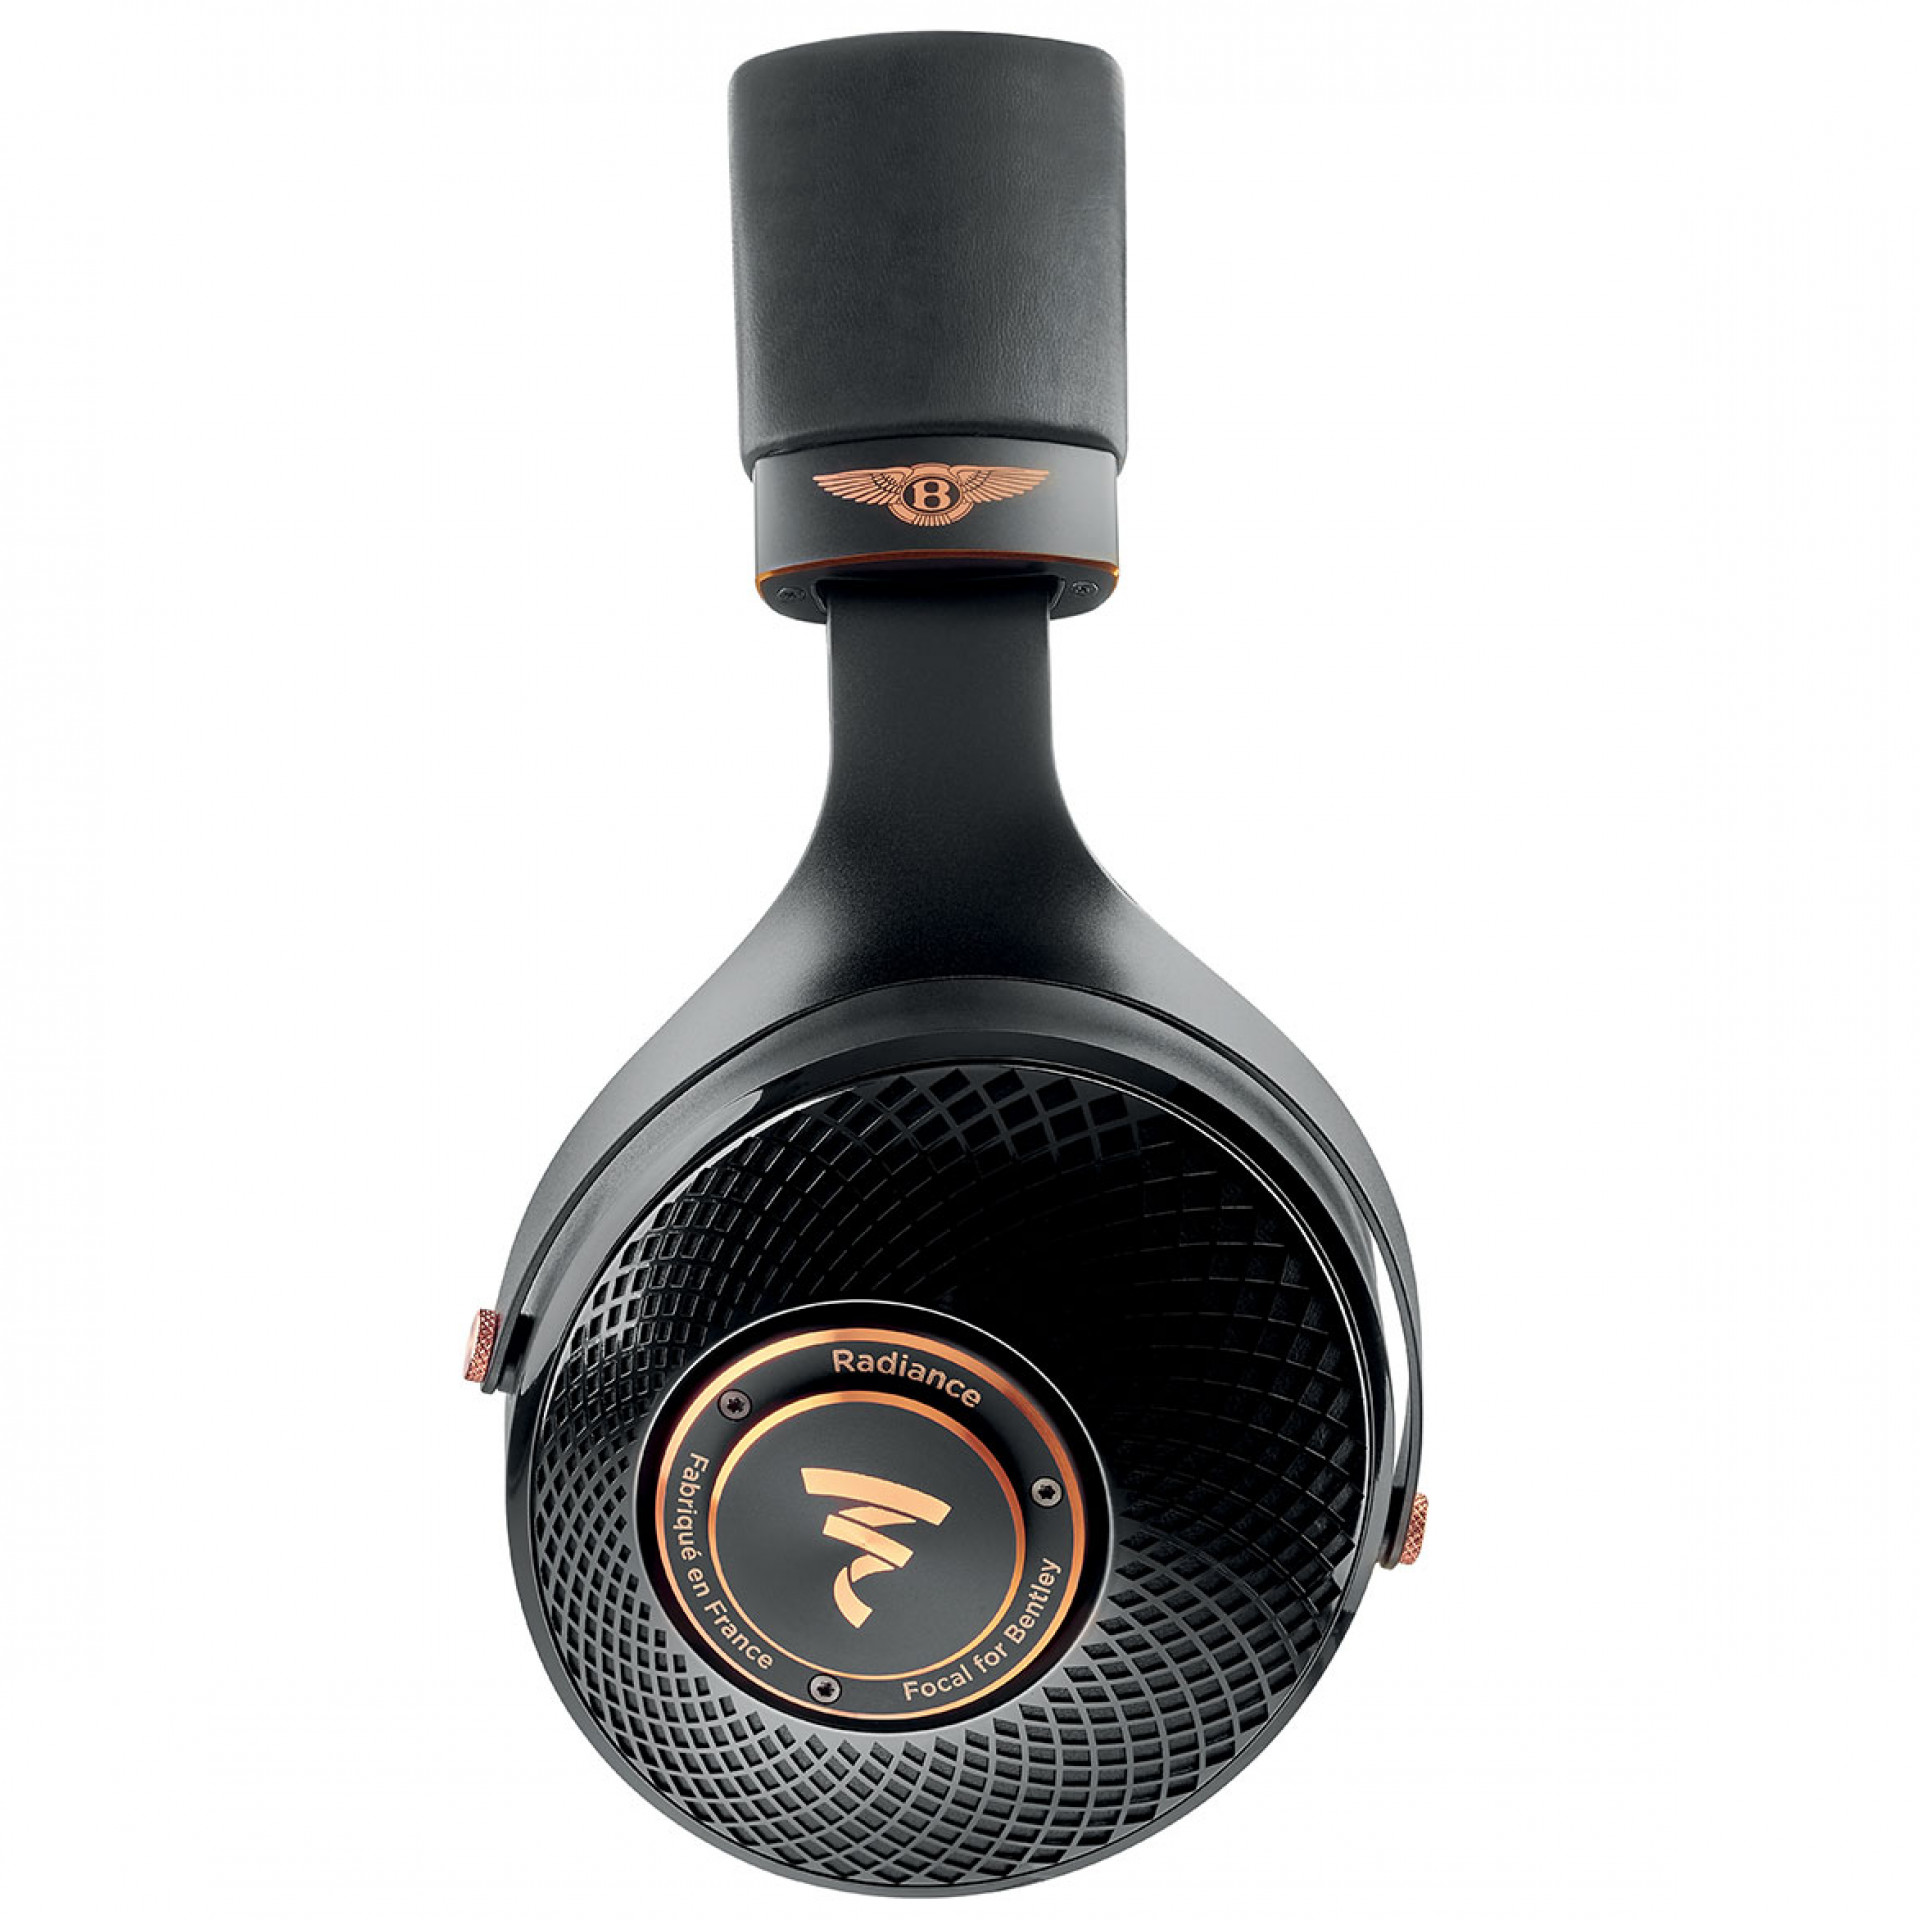 Focal RADIANCE BENTLEY SPECIAL EDITION 